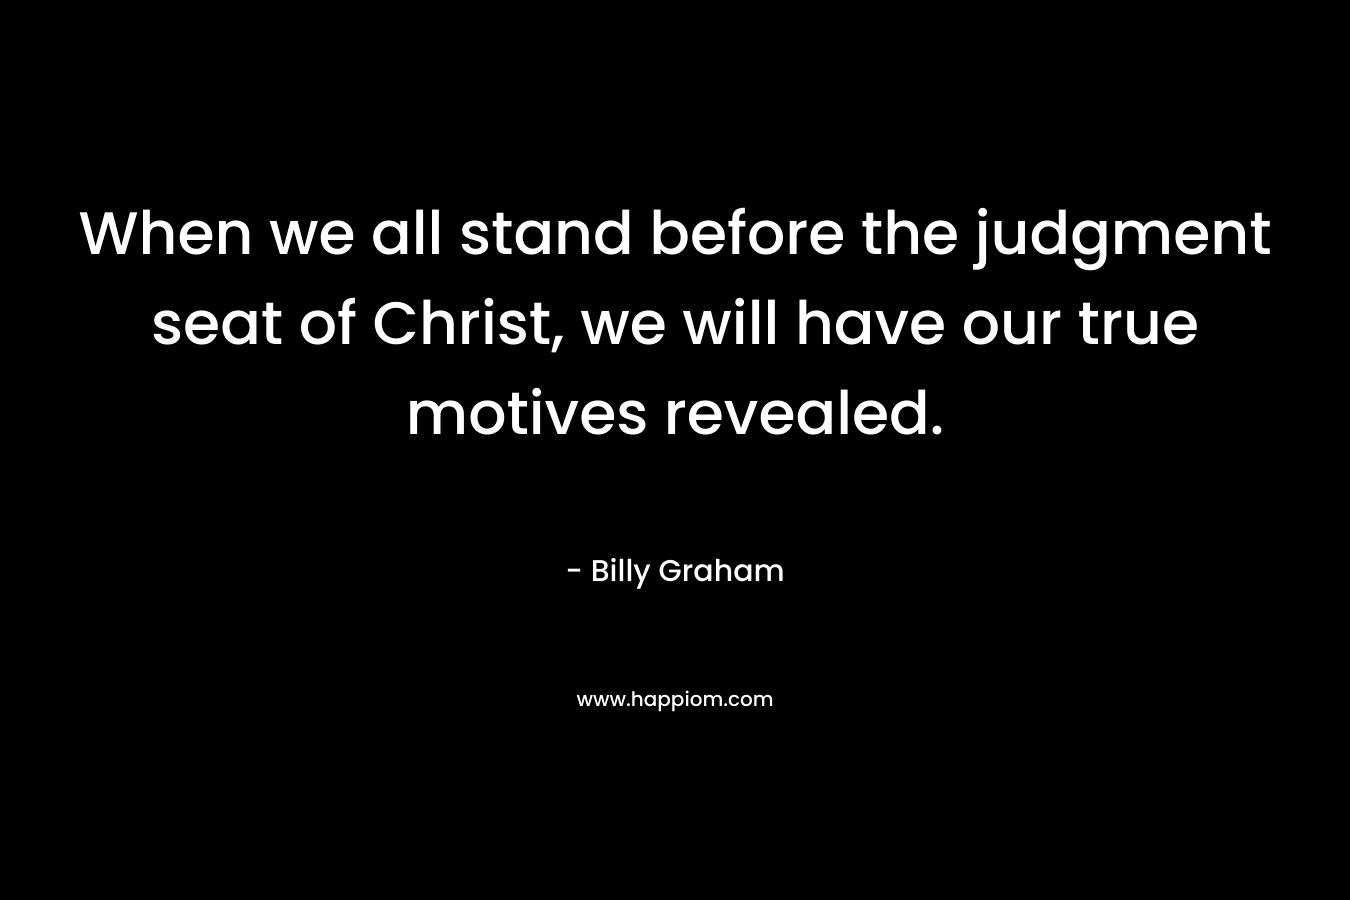 When we all stand before the judgment seat of Christ, we will have our true motives revealed.